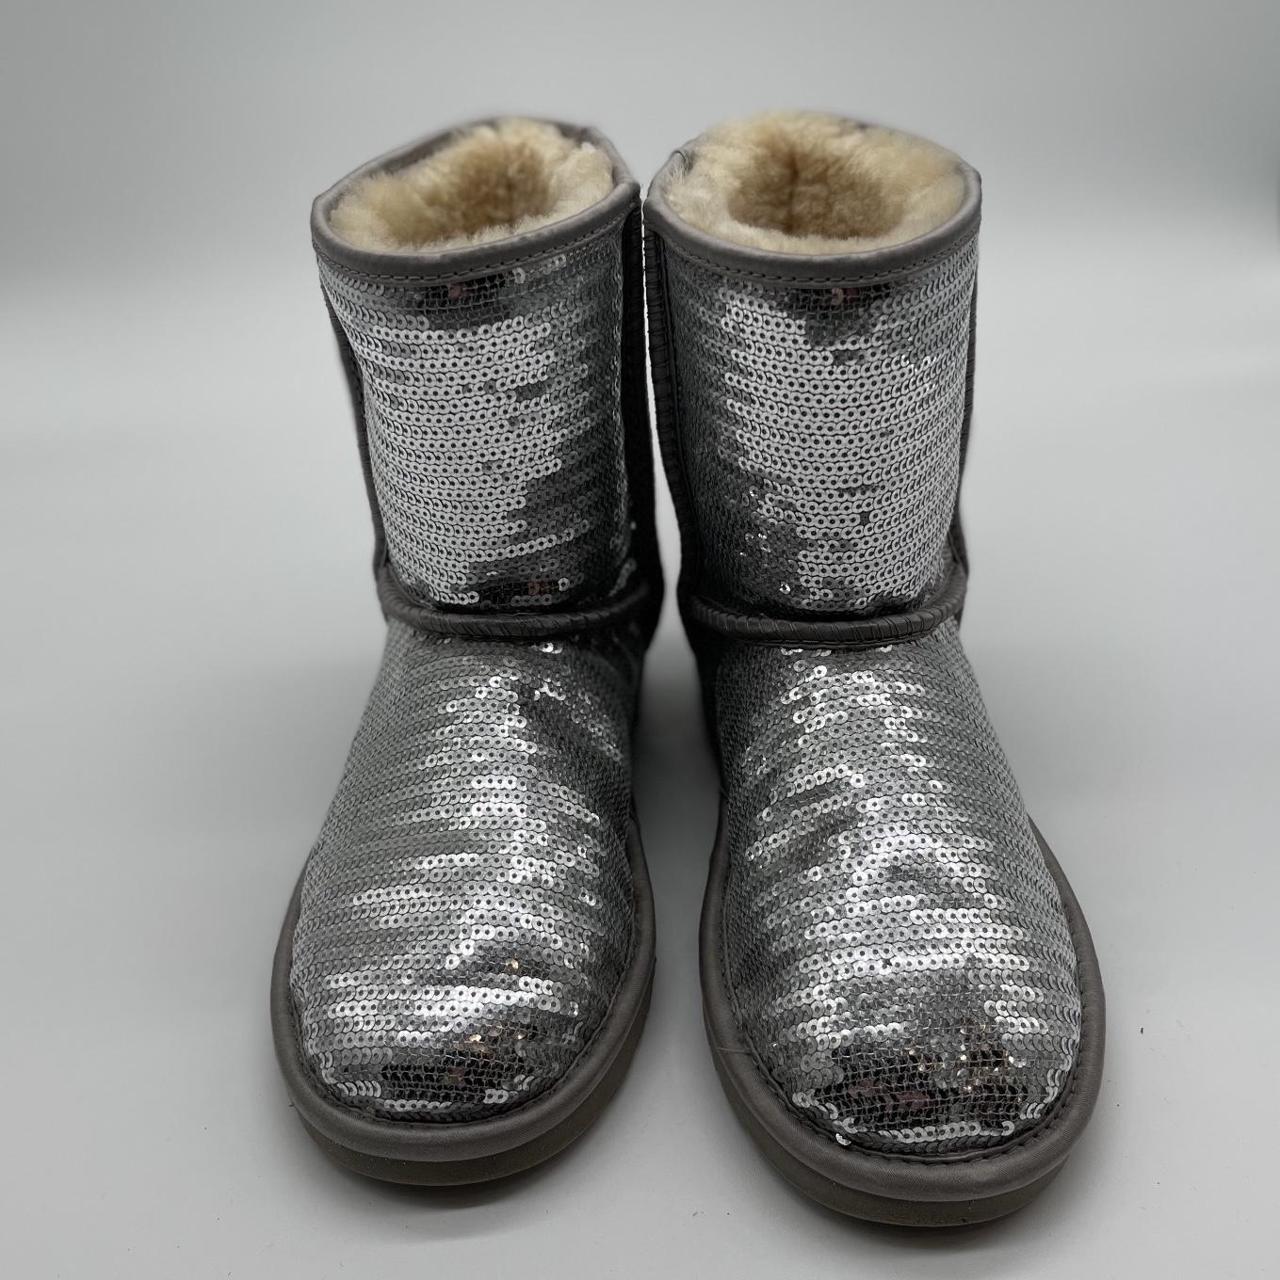 Sequin Silver Uggs -Very sparkly and eye catching!... - Depop